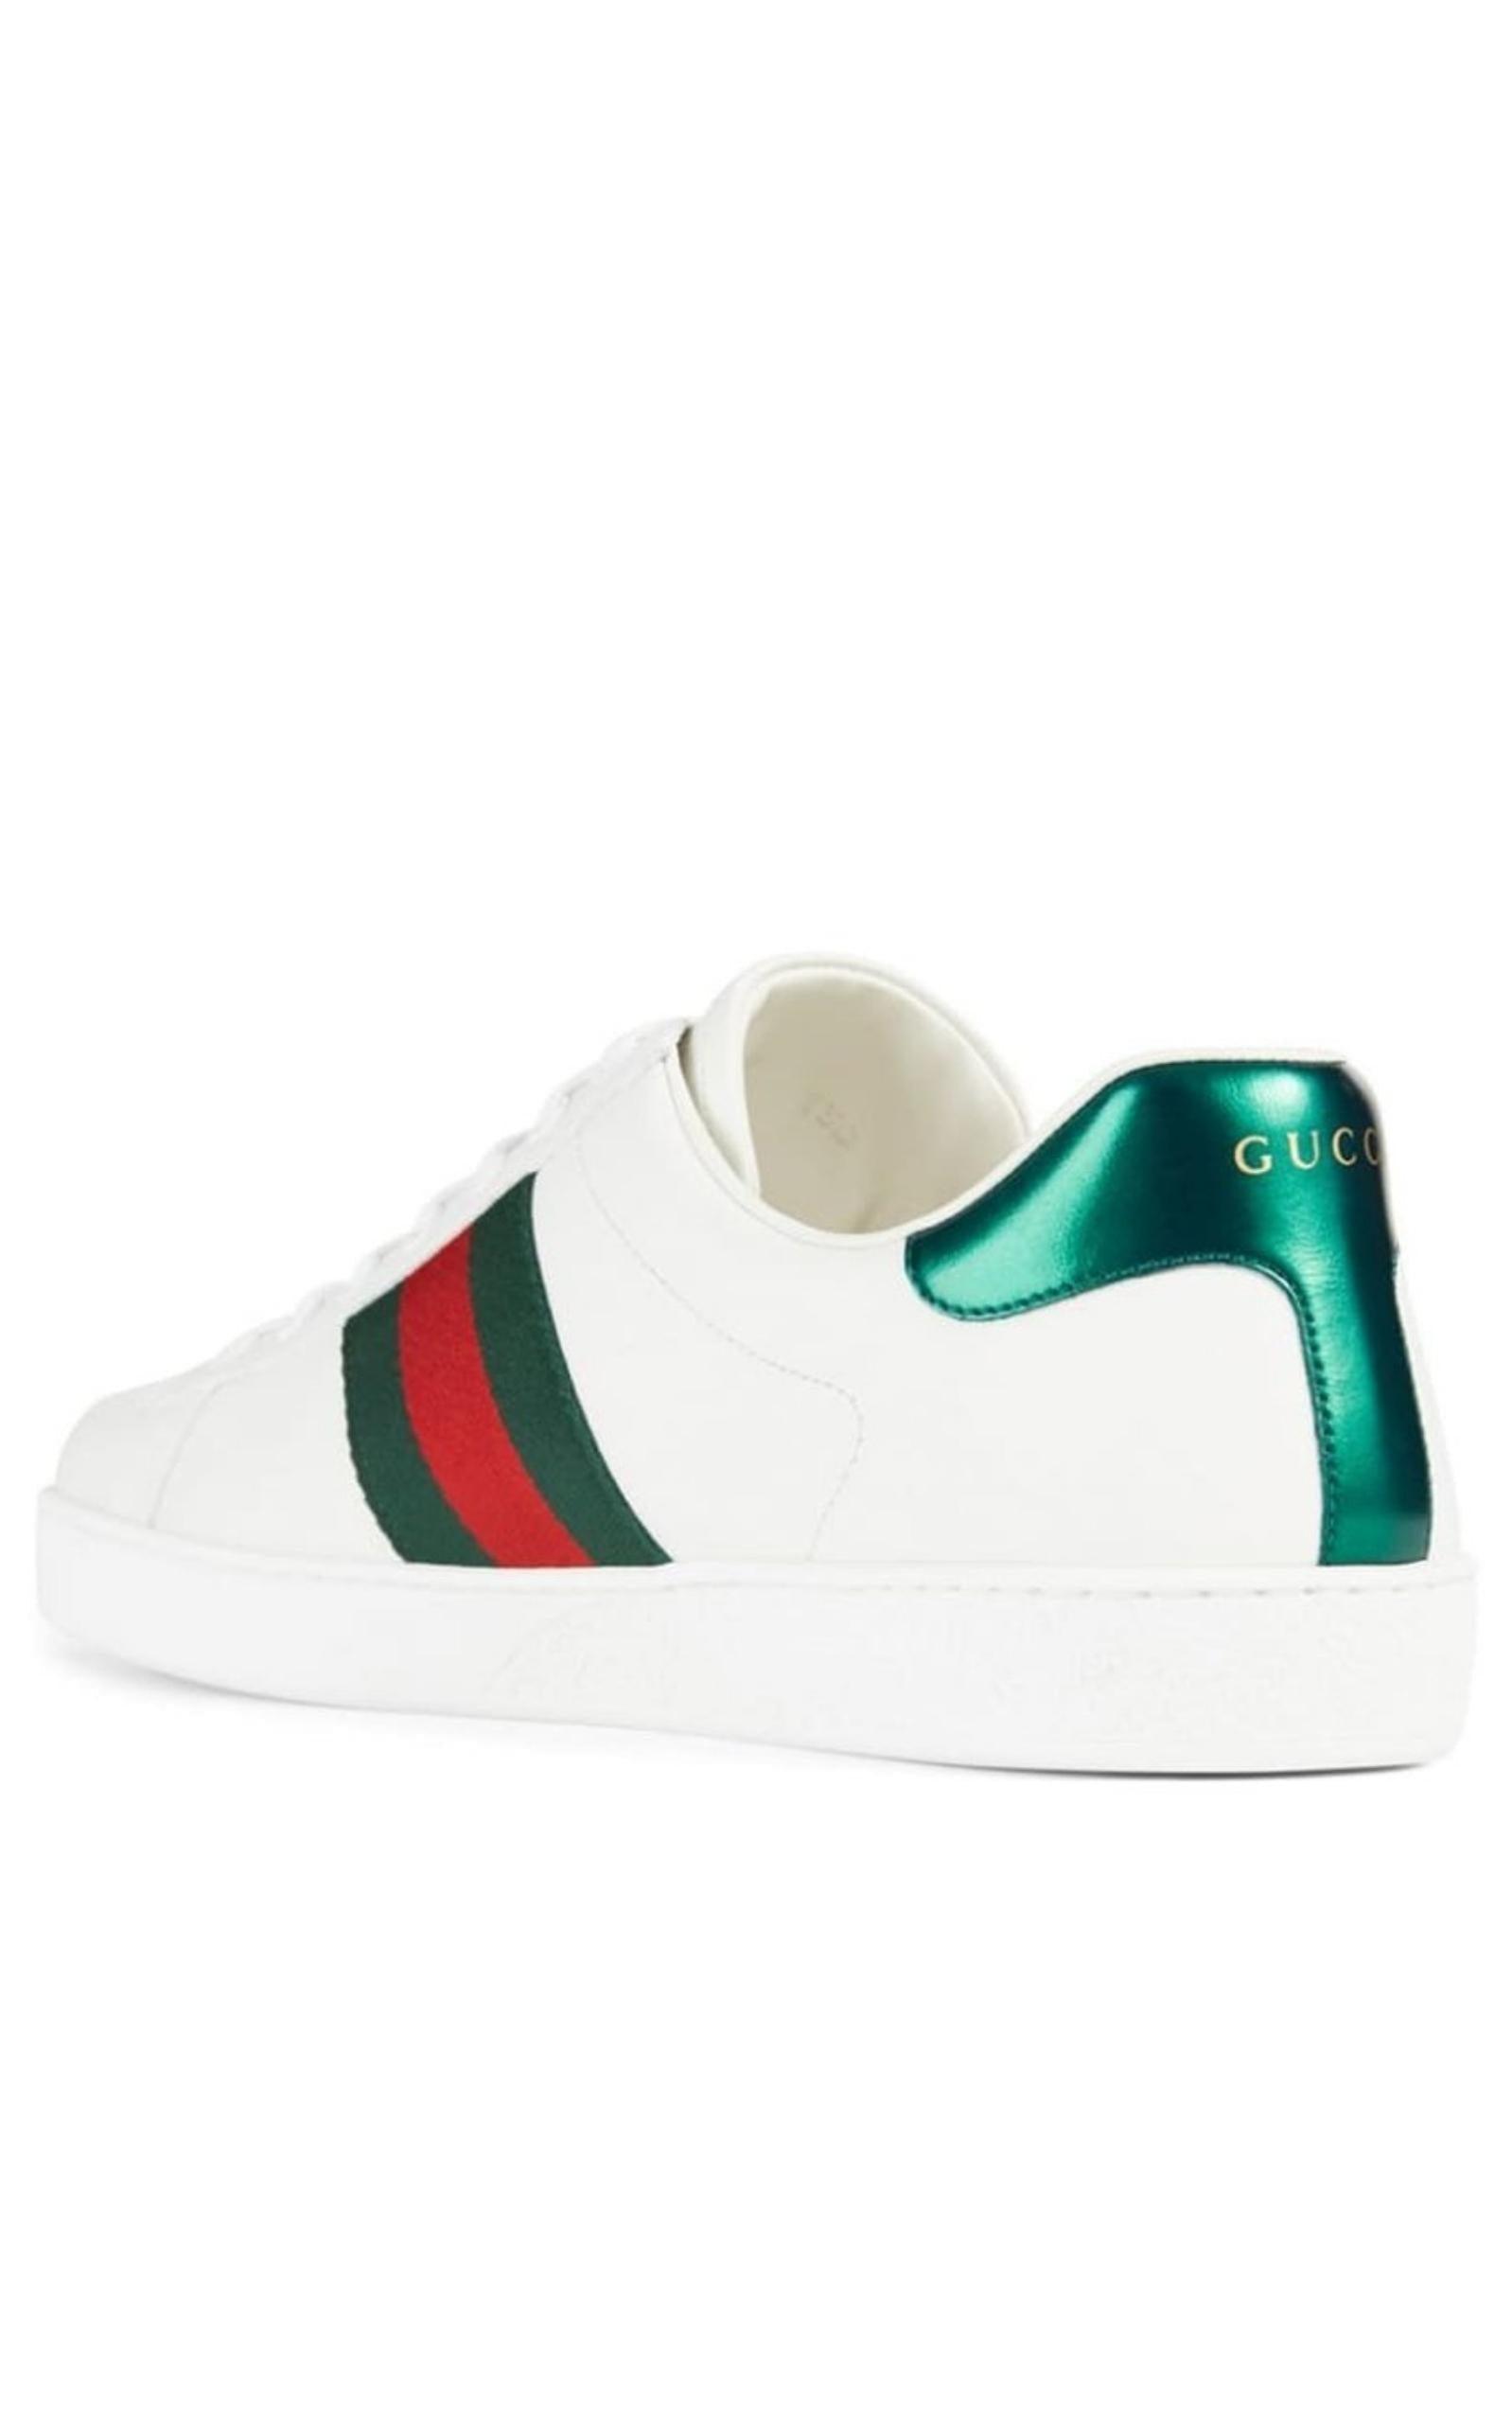 Men's Gucci Ace GG embossed sneaker size 7 Italy